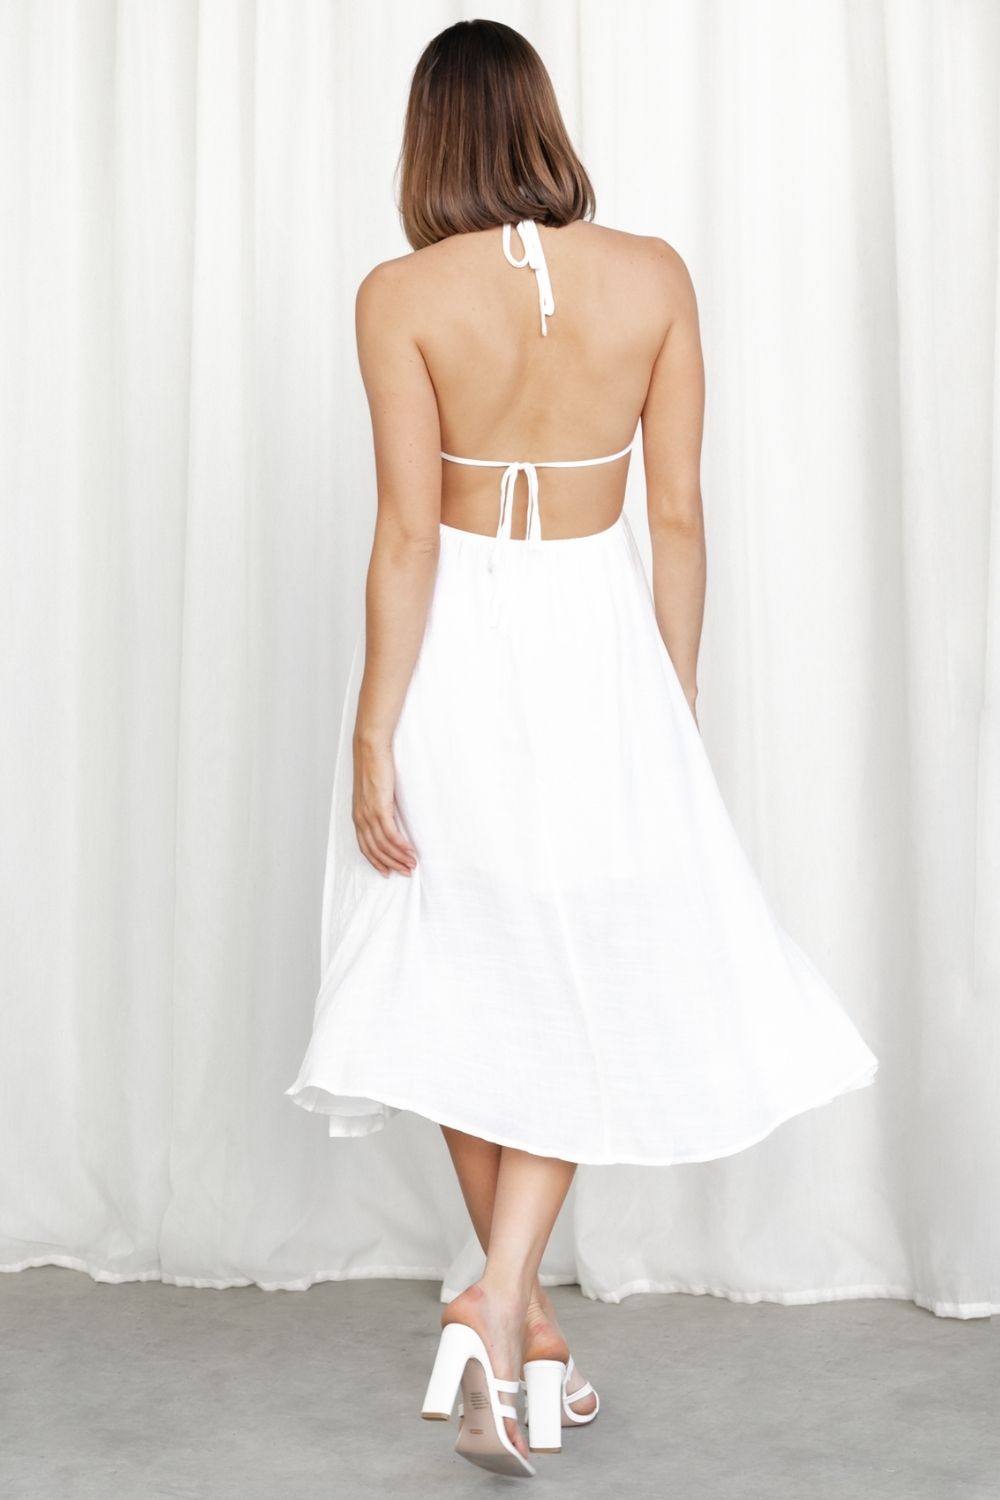 Simplicity White Backless Dress